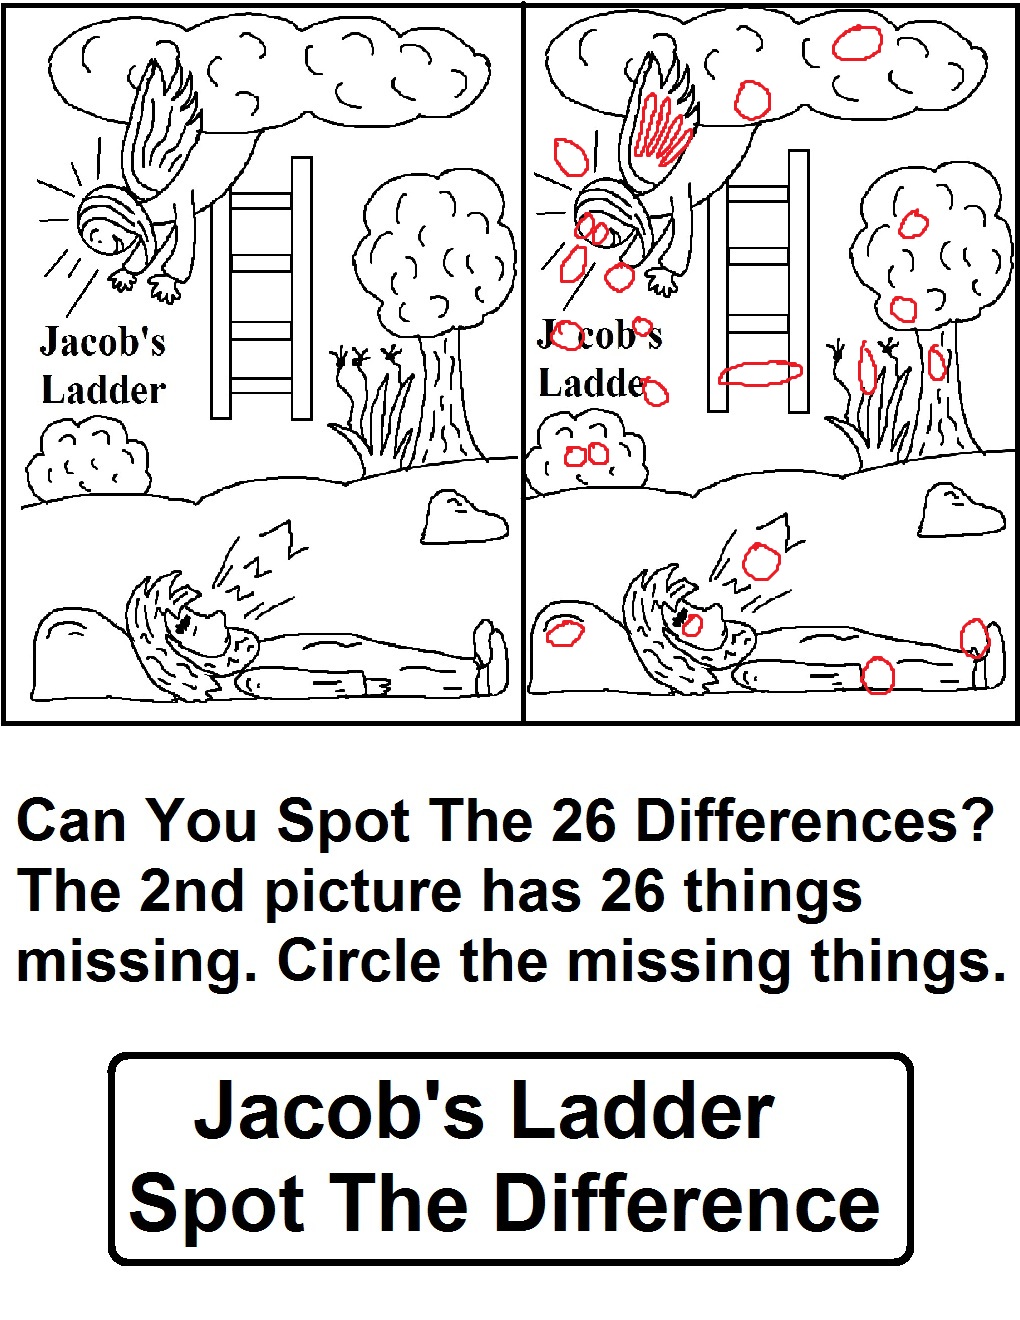 jacobs ladder coloring pages for kids - photo #27